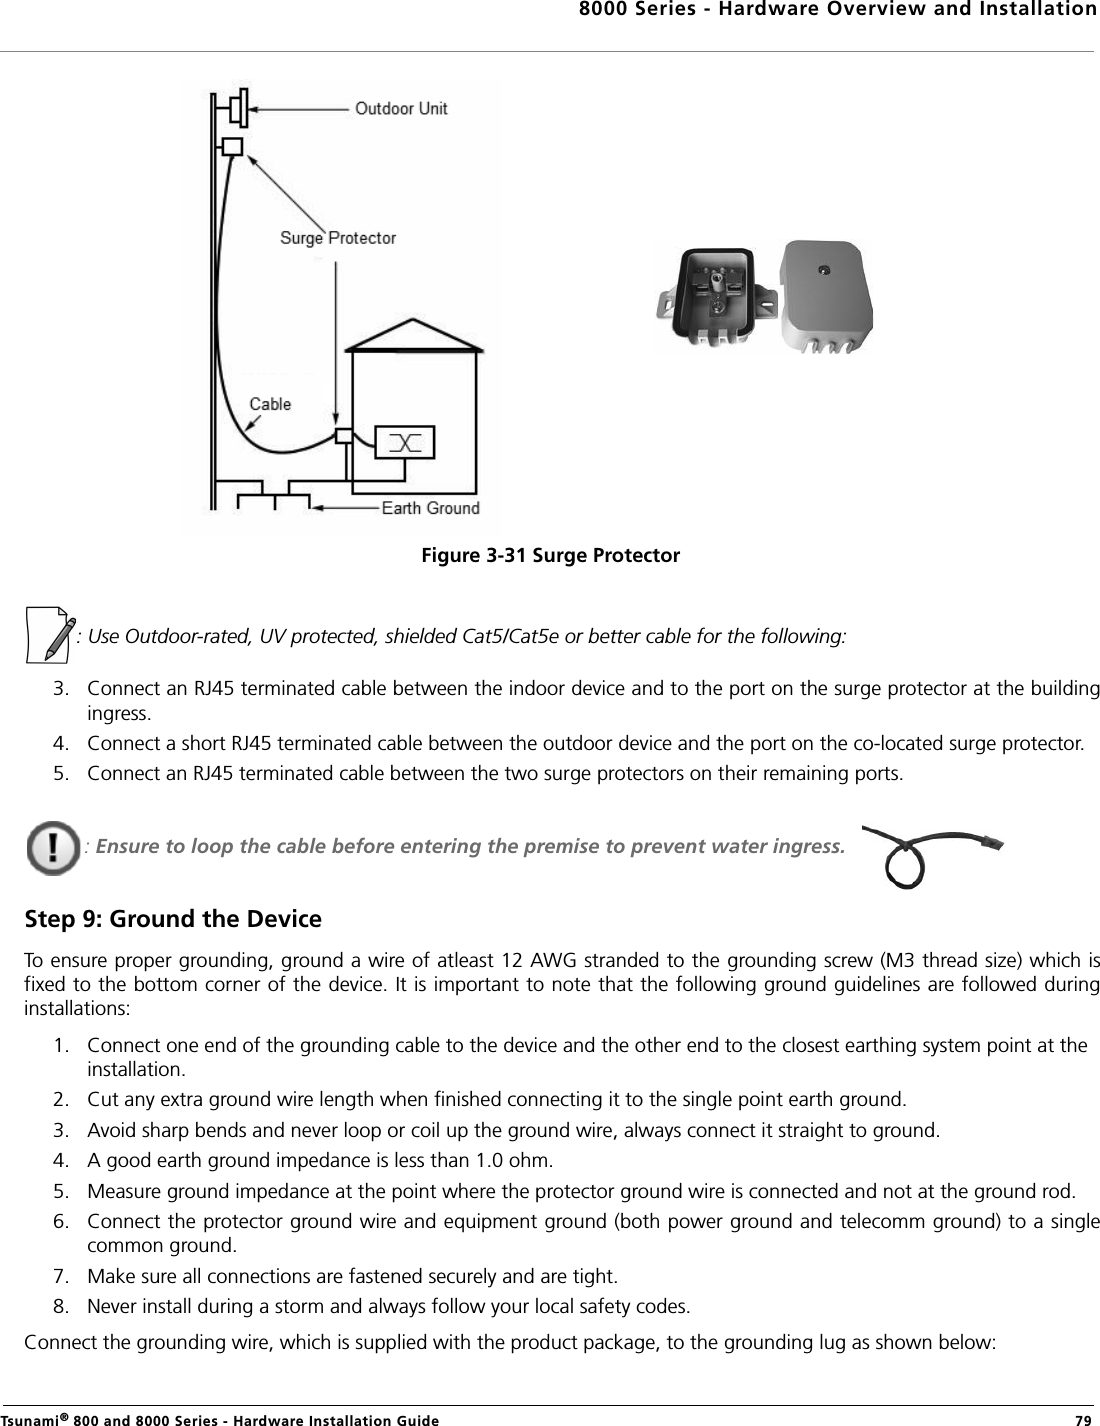 8000 Series - Hardware Overview and InstallationTsunami® 800 and 8000 Series - Hardware Installation Guide  79Figure 3-31 Surge Protector: Use Outdoor-rated, UV protected, shielded Cat5/Cat5e or better cable for the following:3. Connect an RJ45 terminated cable between the indoor device and to the port on the surge protector at the buildingingress. 4. Connect a short RJ45 terminated cable between the outdoor device and the port on the co-located surge protector.5. Connect an RJ45 terminated cable between the two surge protectors on their remaining ports.: Ensure to loop the cable before entering the premise to prevent water ingress. Step 9: Ground the DeviceTo ensure proper grounding, ground a wire of atleast 12 AWG stranded to the grounding screw (M3 thread size) which isfixed to the bottom corner of the device. It is important to note that the following ground guidelines are followed duringinstallations:1. Connect one end of the grounding cable to the device and the other end to the closest earthing system point at the installation.2. Cut any extra ground wire length when finished connecting it to the single point earth ground. 3. Avoid sharp bends and never loop or coil up the ground wire, always connect it straight to ground.4. A good earth ground impedance is less than 1.0 ohm. 5. Measure ground impedance at the point where the protector ground wire is connected and not at the ground rod.6. Connect the protector ground wire and equipment ground (both power ground and telecomm ground) to a singlecommon ground. 7. Make sure all connections are fastened securely and are tight. 8. Never install during a storm and always follow your local safety codes.Connect the grounding wire, which is supplied with the product package, to the grounding lug as shown below: